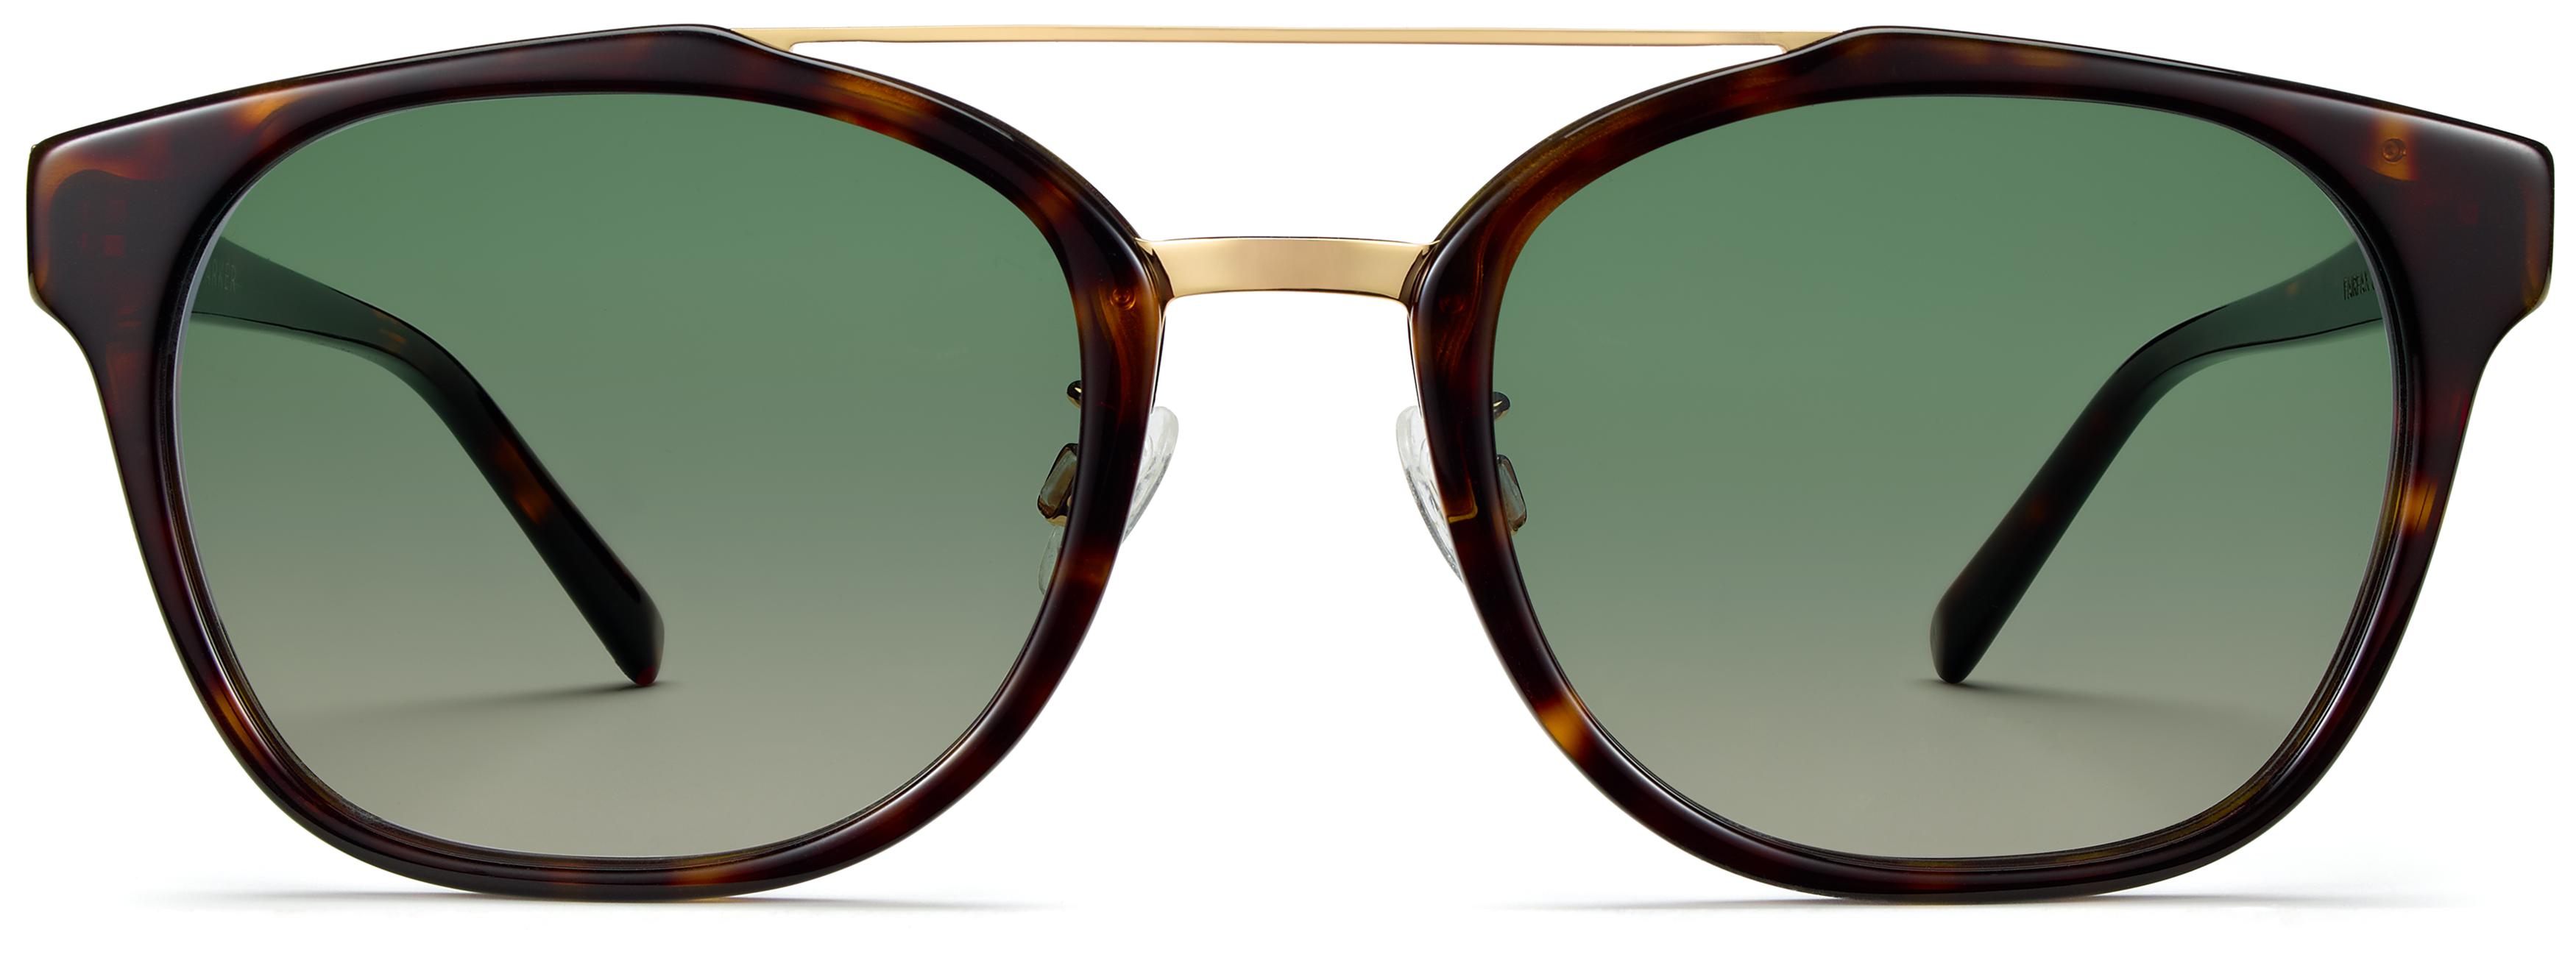 Fairfax Cognac Tortoise with Polished Gold